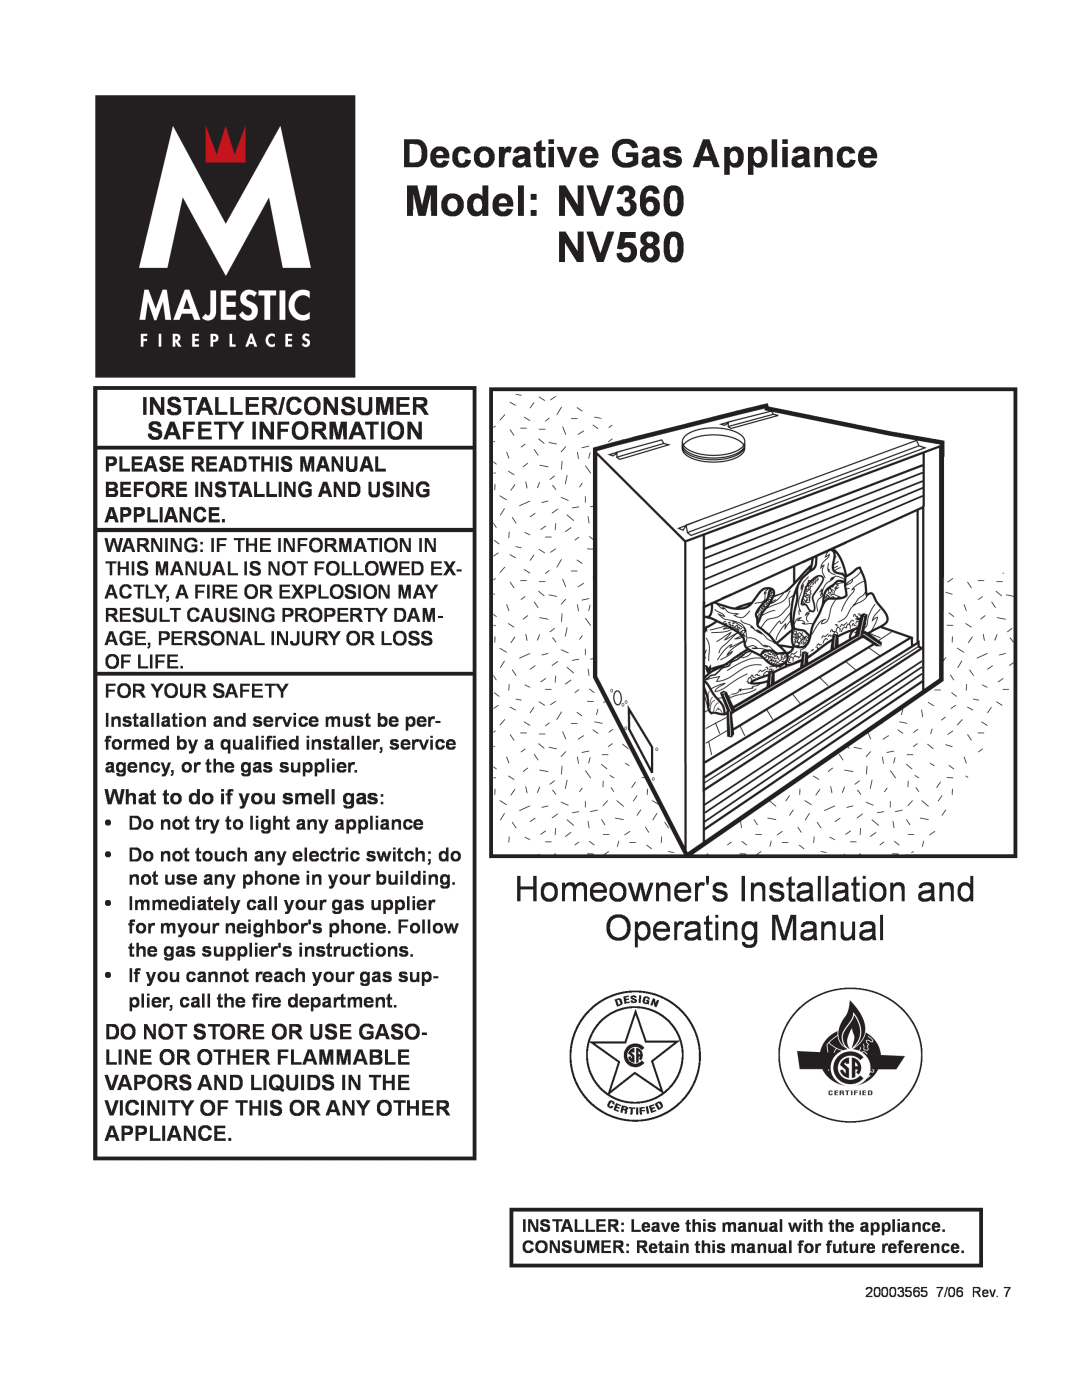 Vermont Casting manual Model NV360 NV580, Decorative Gas Appliance, Homeowners Installation and Operating Manual 